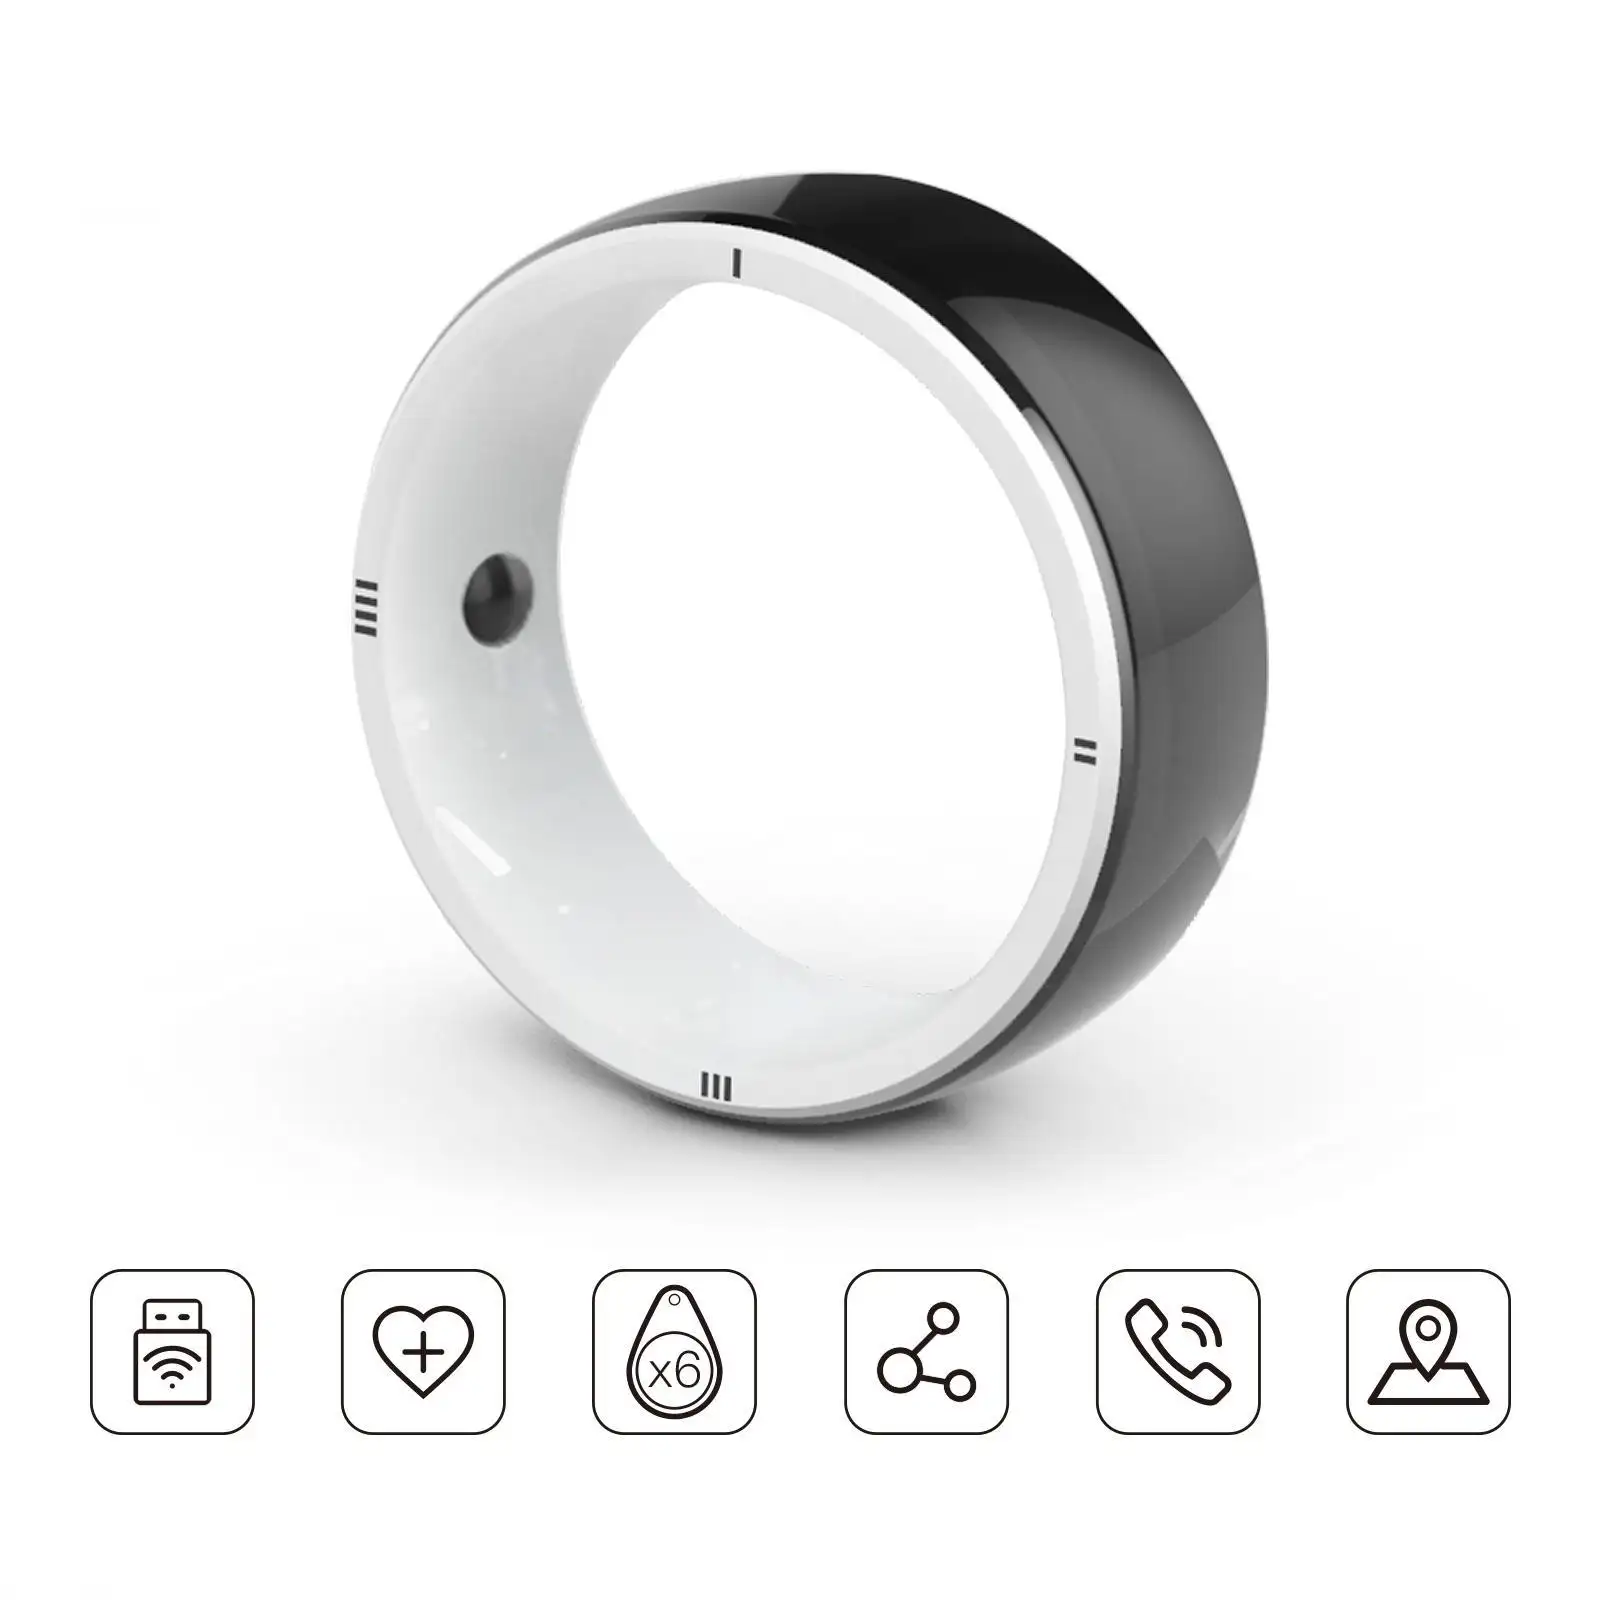 JAKCOM R5 Smart Ring New Smart Ring Best gift with gaming keyboard and mouse for tv deals today ac dc adapter 50v 12 feet